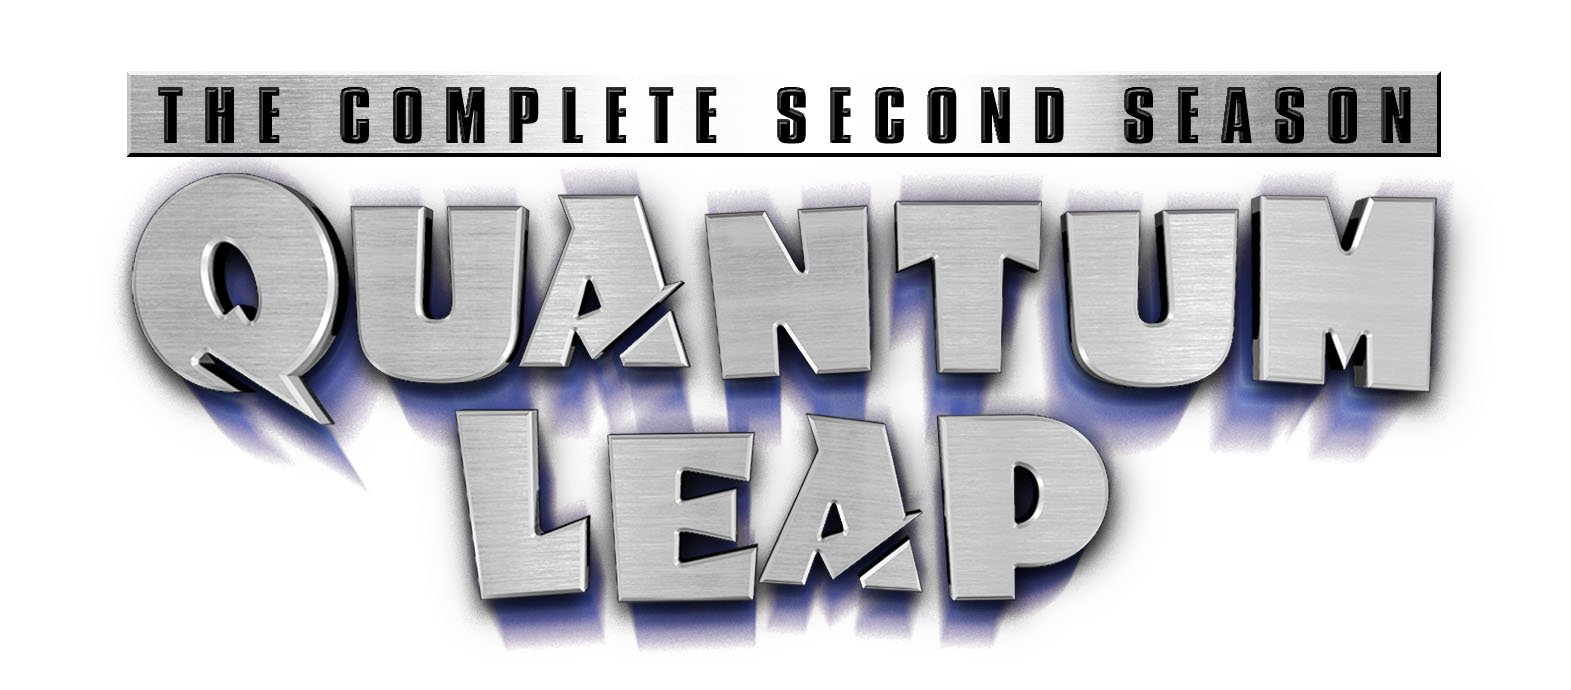 Quantum Leap - The Complete Second Season on DVD